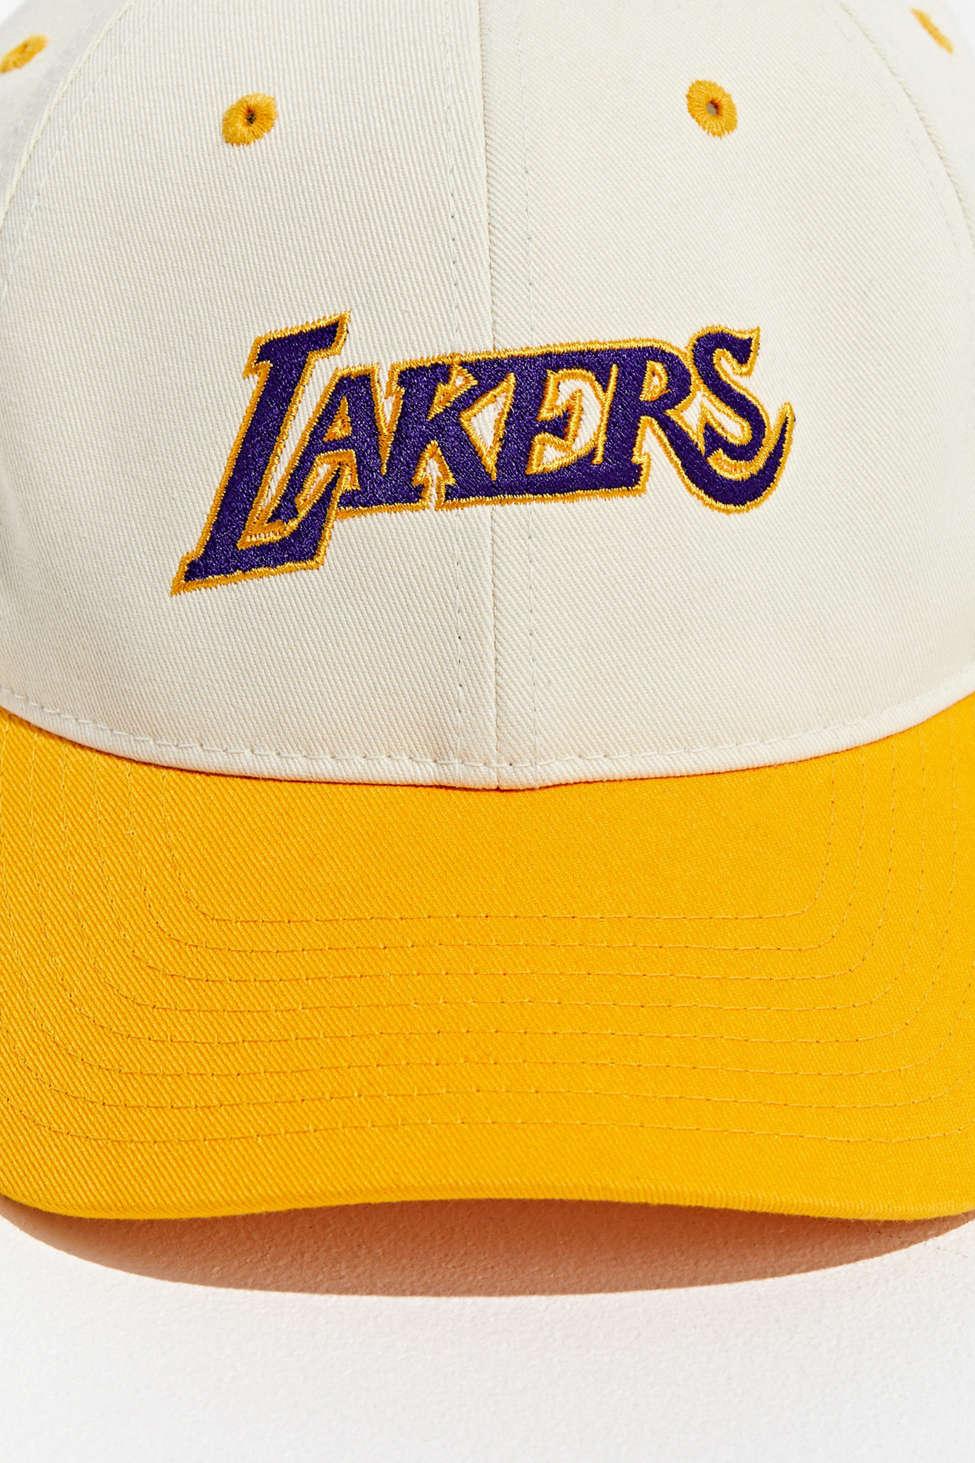 Men's Mitchell Ness Purple/Gold Los Angeles Lakers Two-Tone Wool